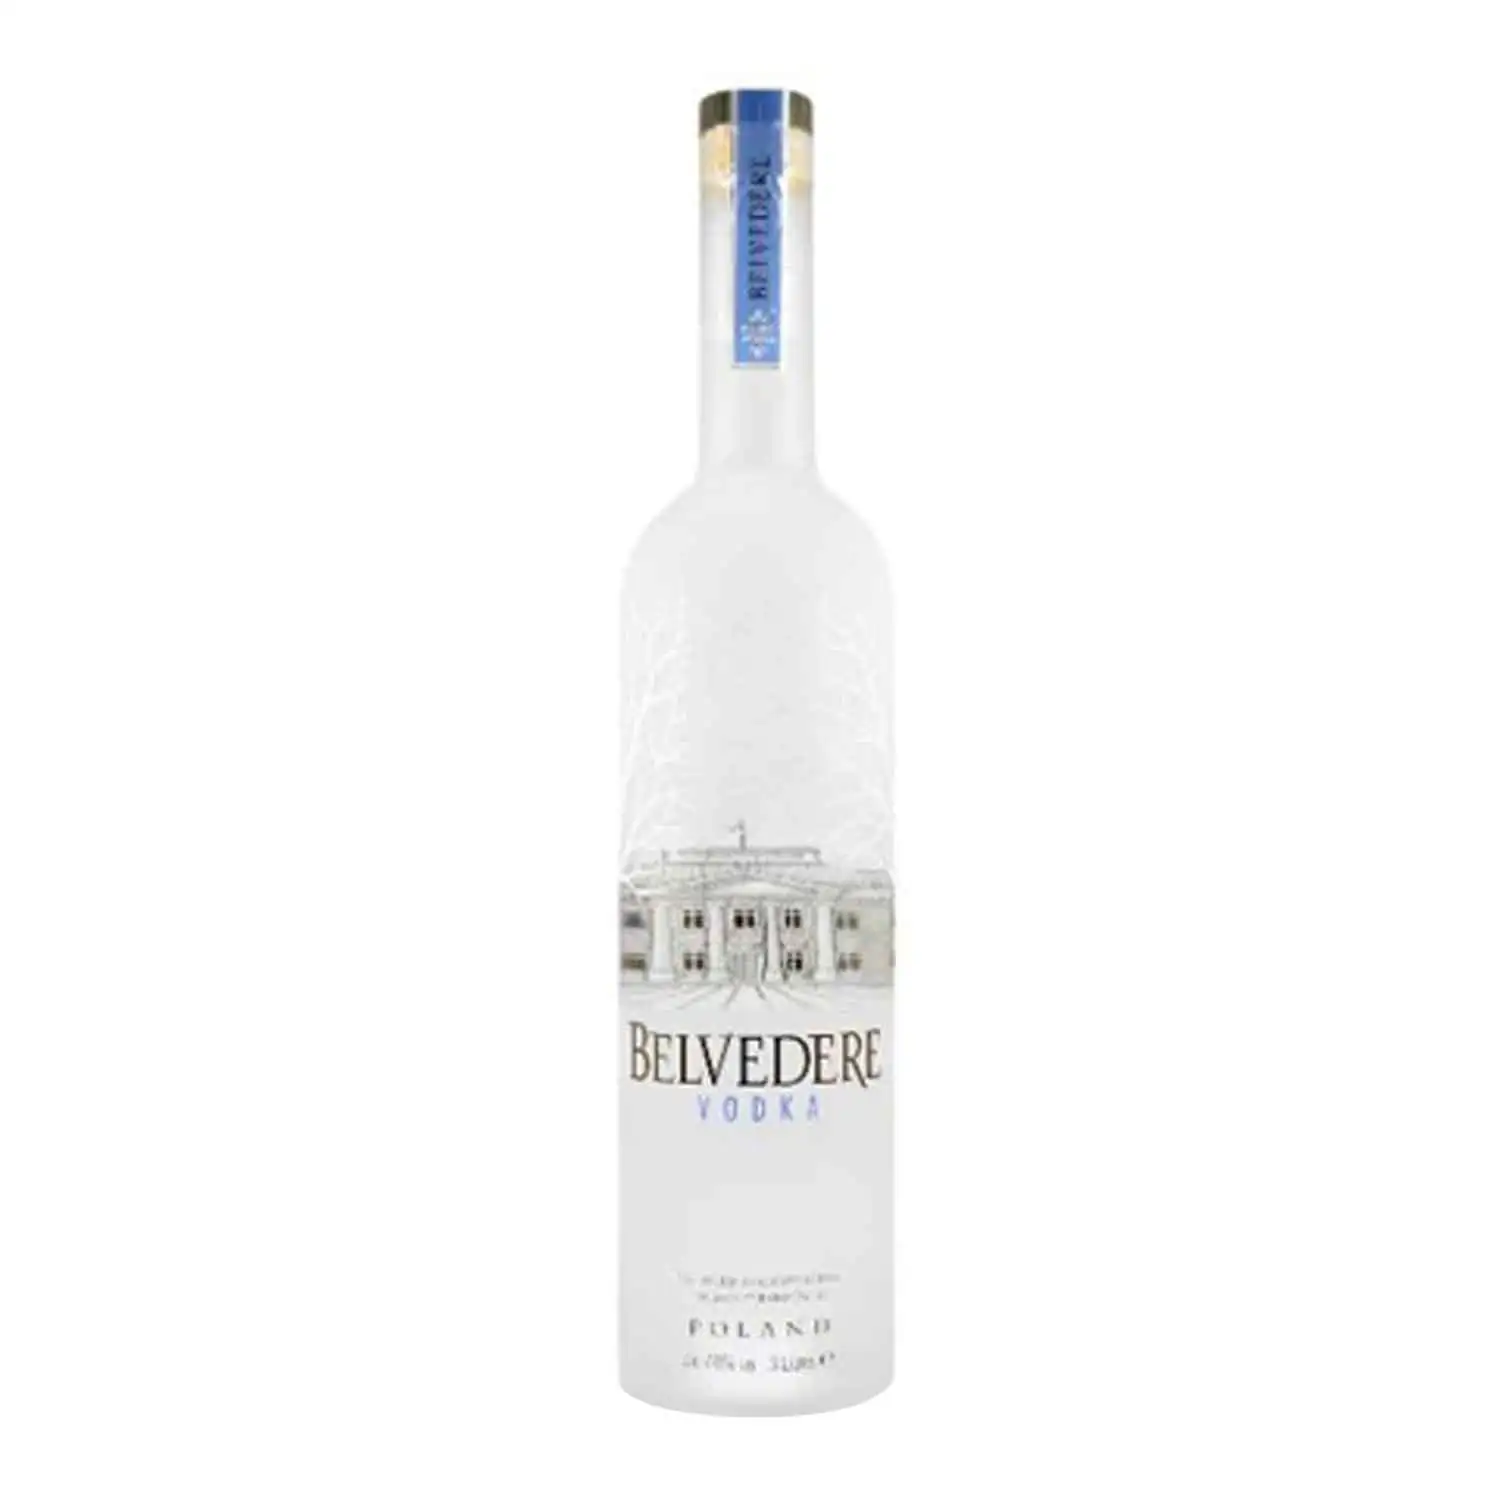 Belvedere 3l Alc 40% - Buy at Real Tobacco